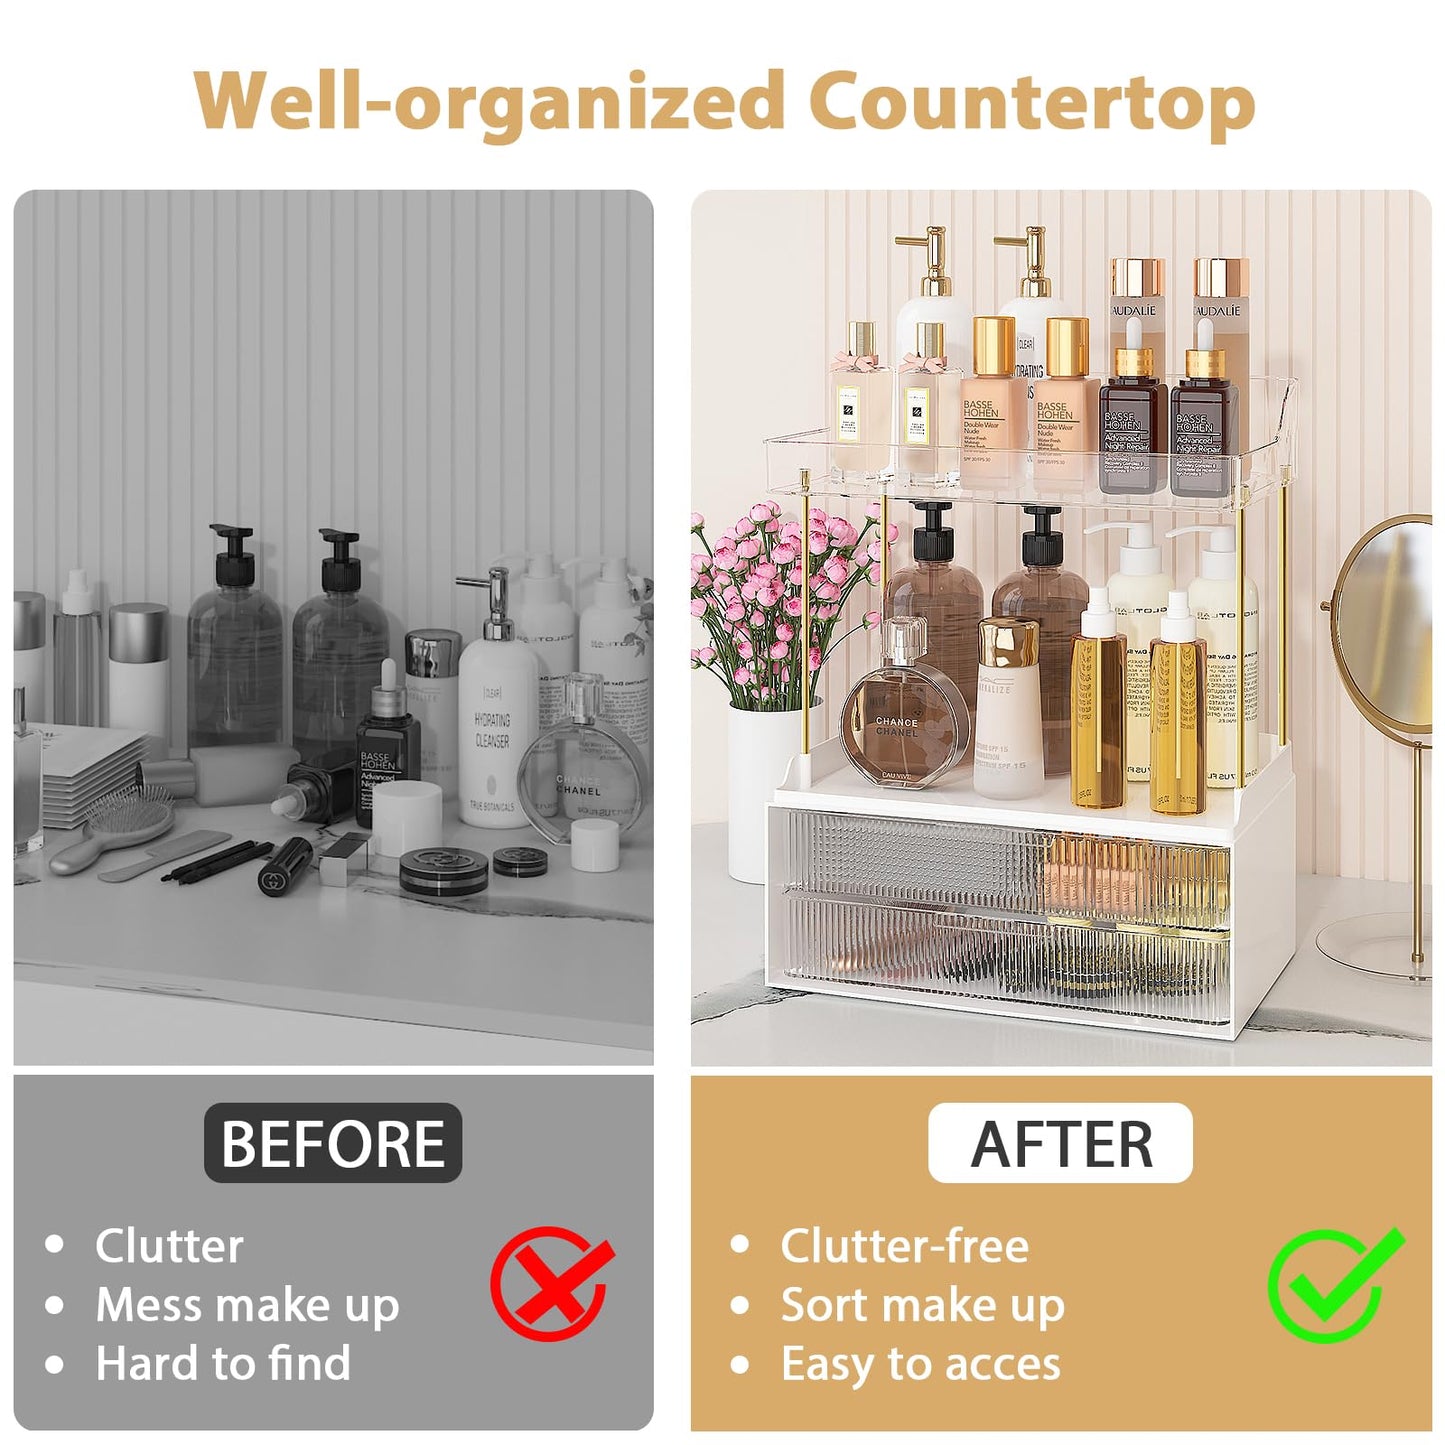 Webetop Bathroom Organizers and Storage Countertop, Large Skincare Counter Organizer with 2 Drawers, Makeup Organizer for Vanity Storage, Cosmetics, Perfume, Toiletry (Clear)